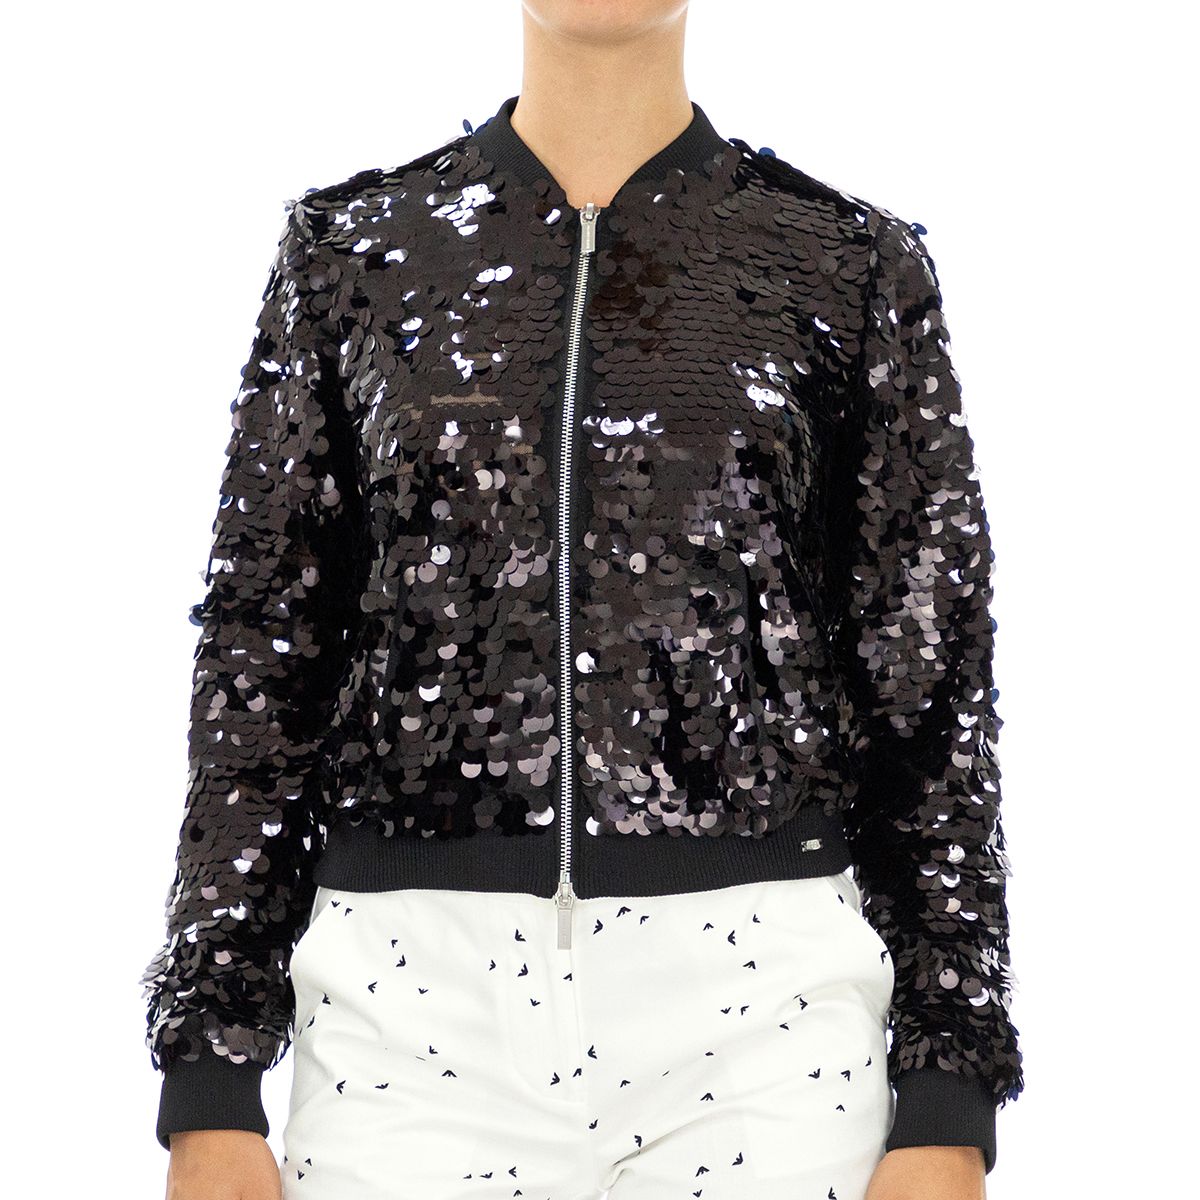 Armani Exchange 6ZYG37YNGJZ-1200-10 Fall in love with this sequined jacket, which will brighten up your nights.